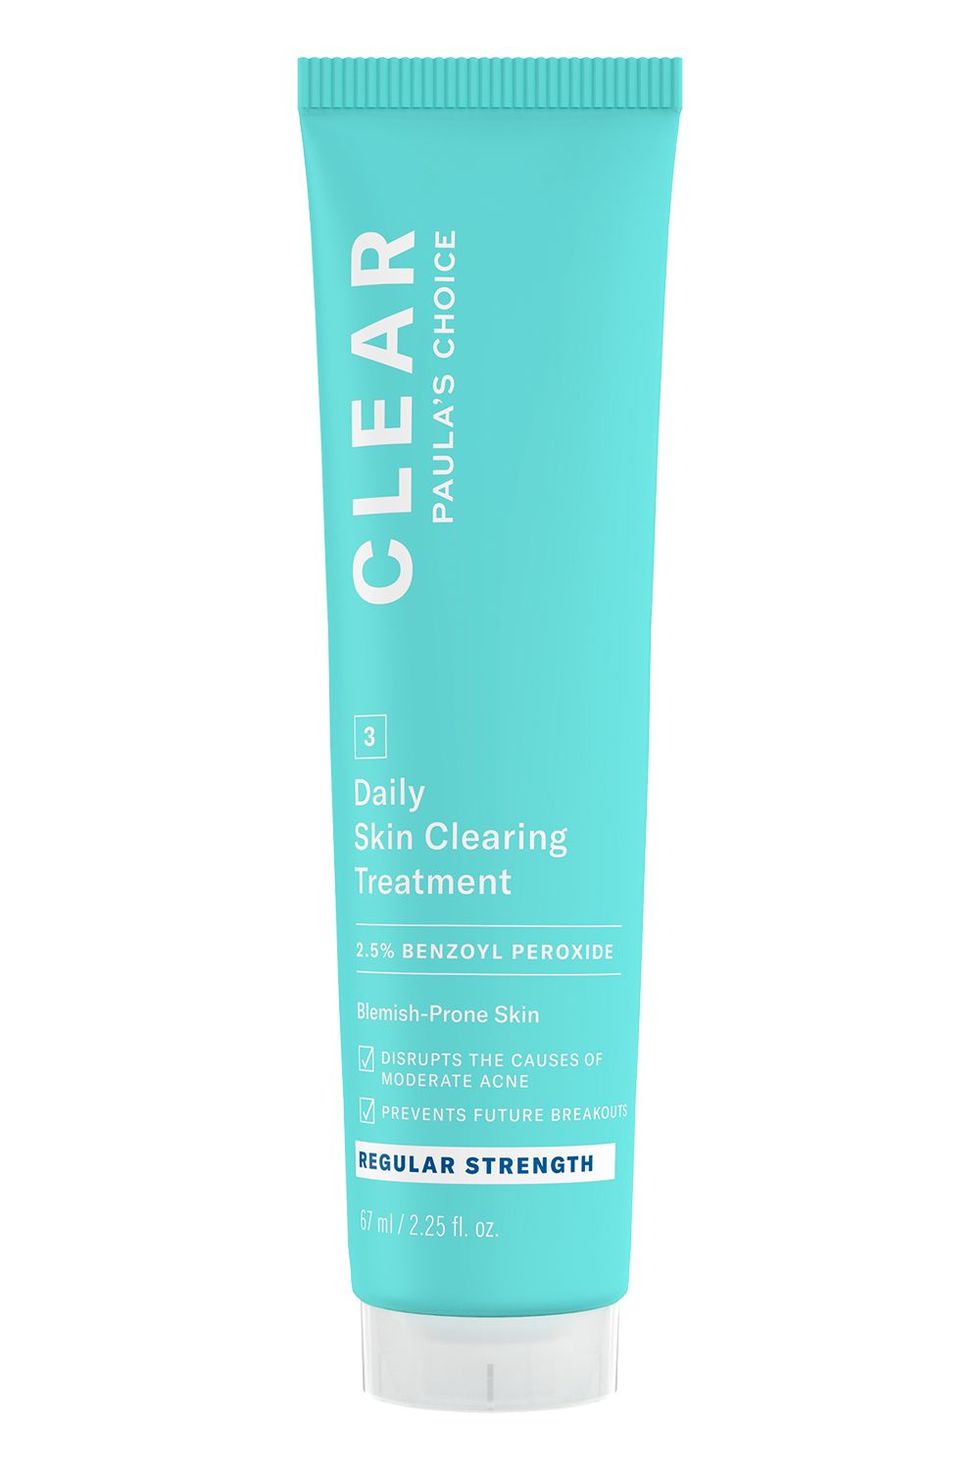 Paula's Choice Clear Daily Skin Clearing Treatment with 2.5% Benzoyl Peroxide